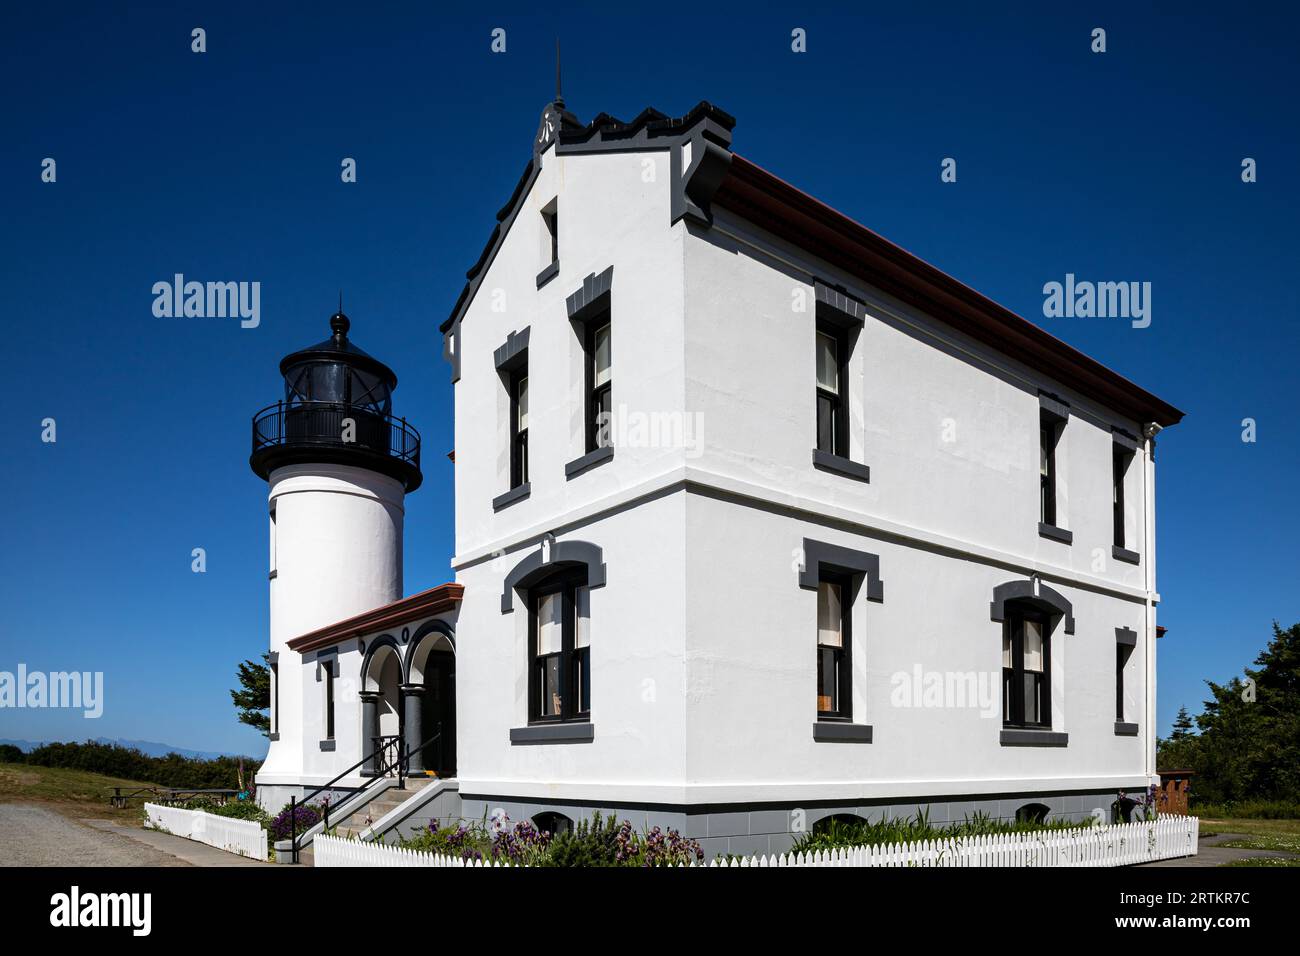 WA23606-00...WASHINGTON - Admiralty Head Lighthouse located in Fort Casey State Park, overlooking Admiralty Inlet. Stock Photo